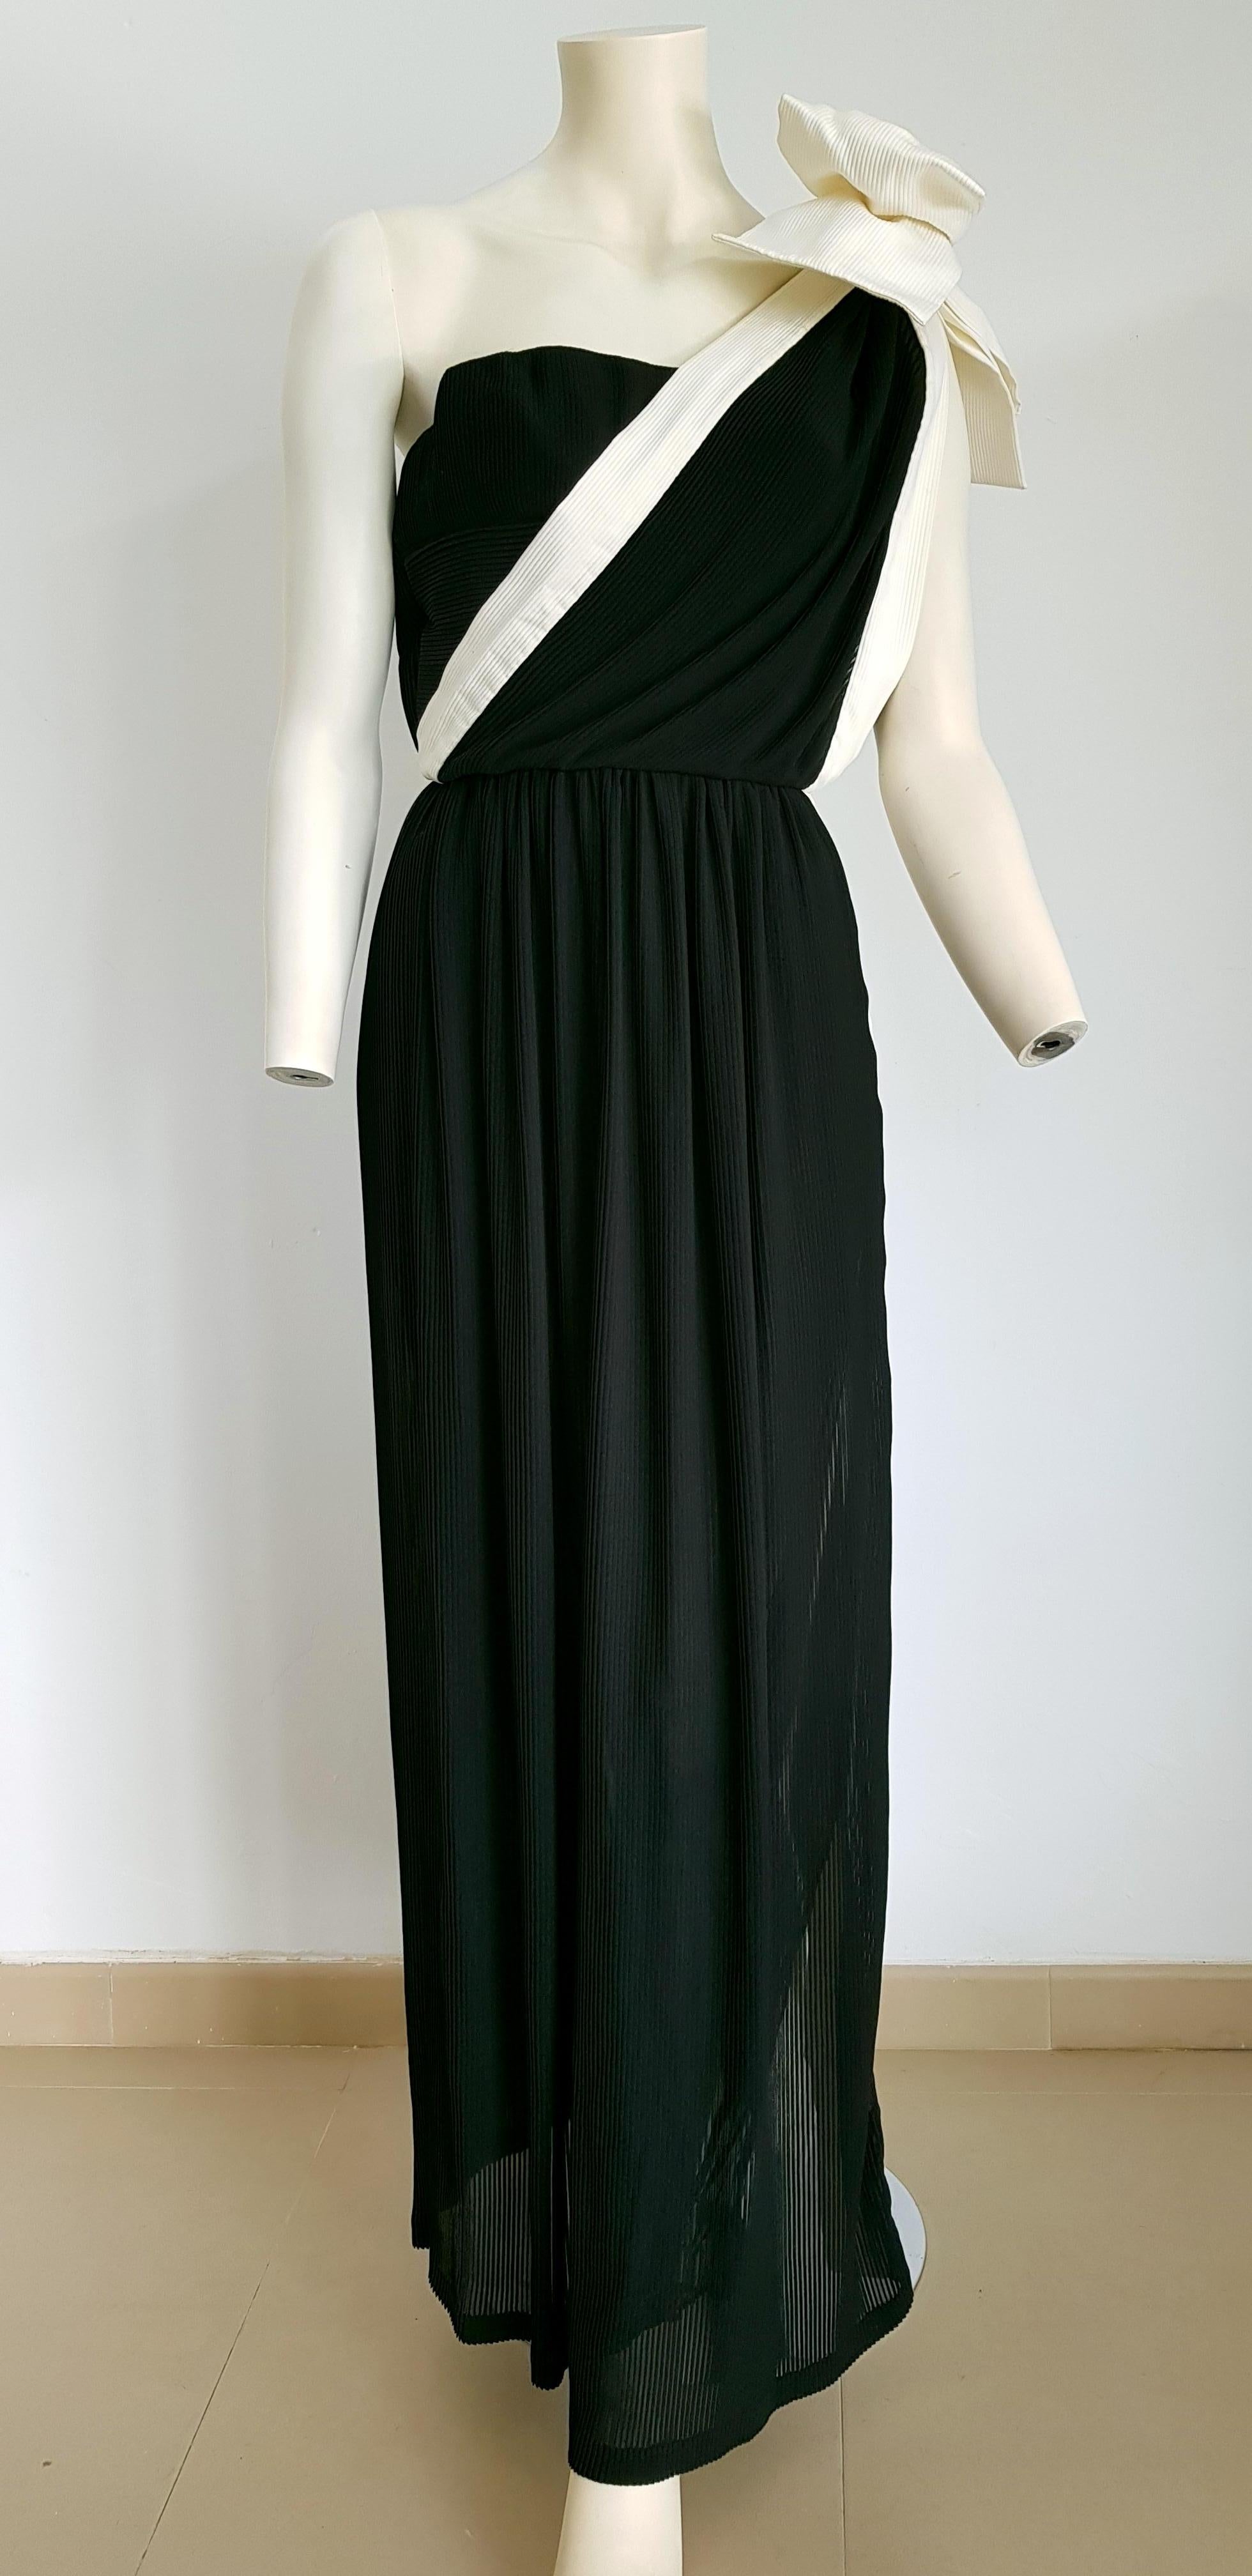 VALENTINO Haute Couture, one shoulder strap with white bow, vertical white left side stripe, pleated black silk dress gown - Unworn, New.

By 